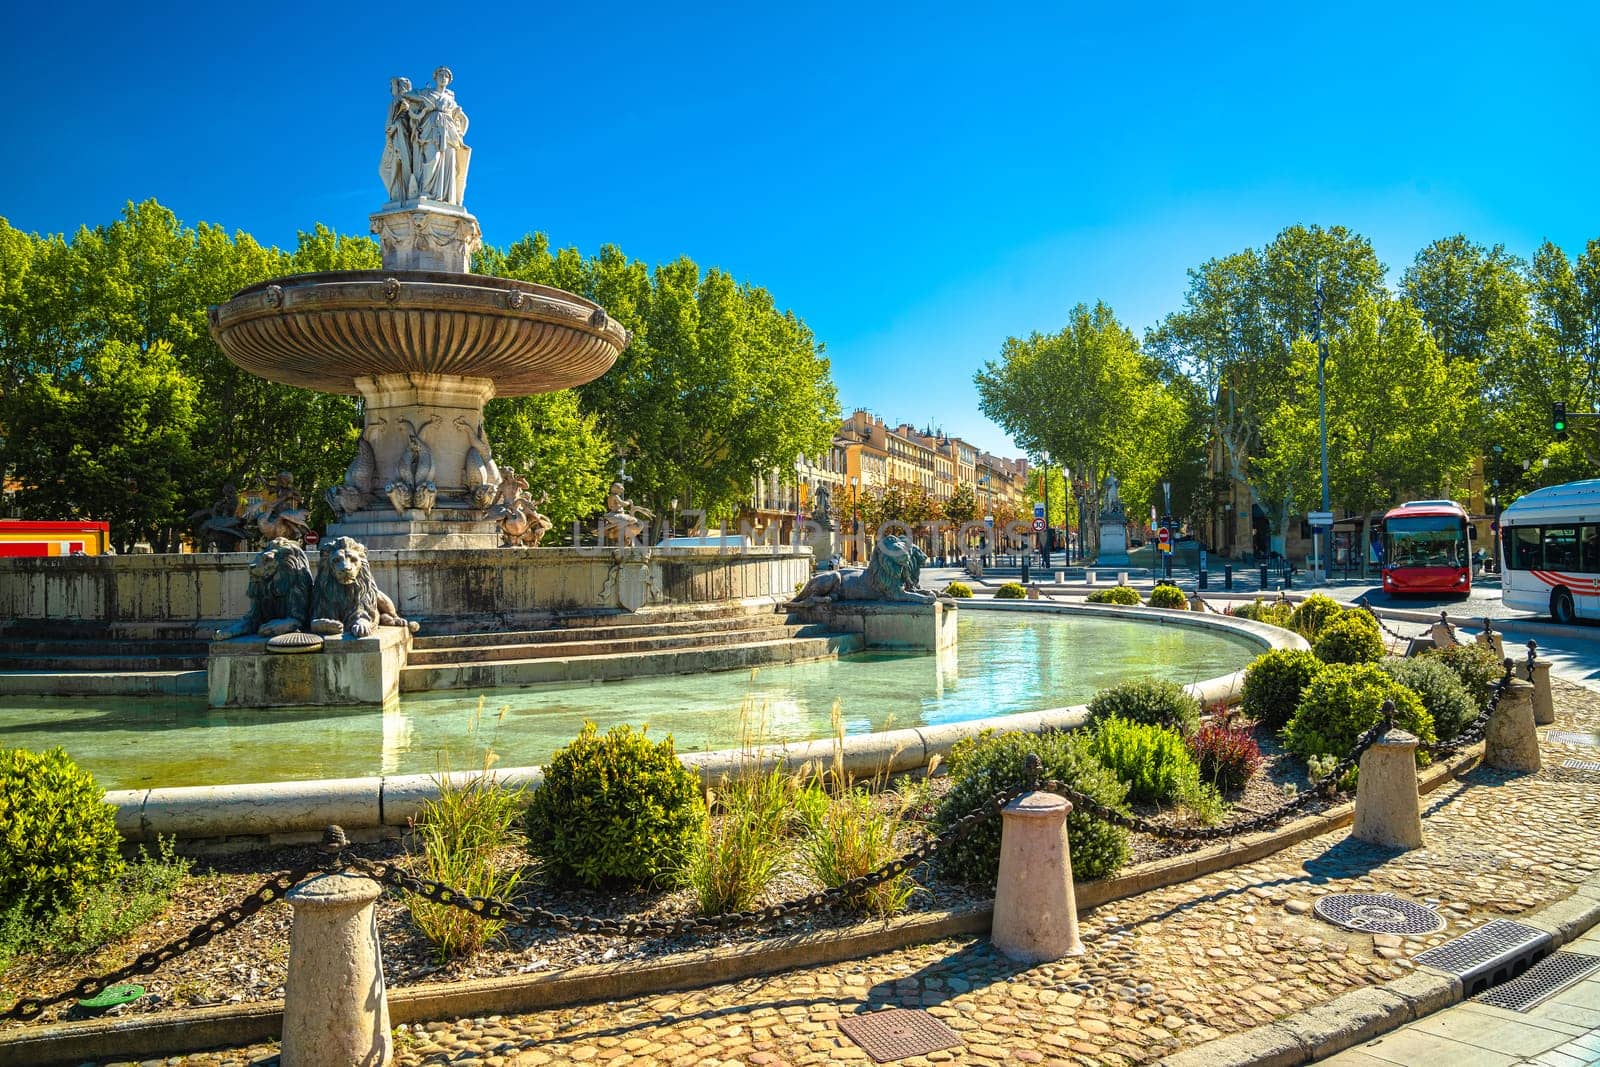 Aix en Provence fountain and cityscape view, Provance region of southern France